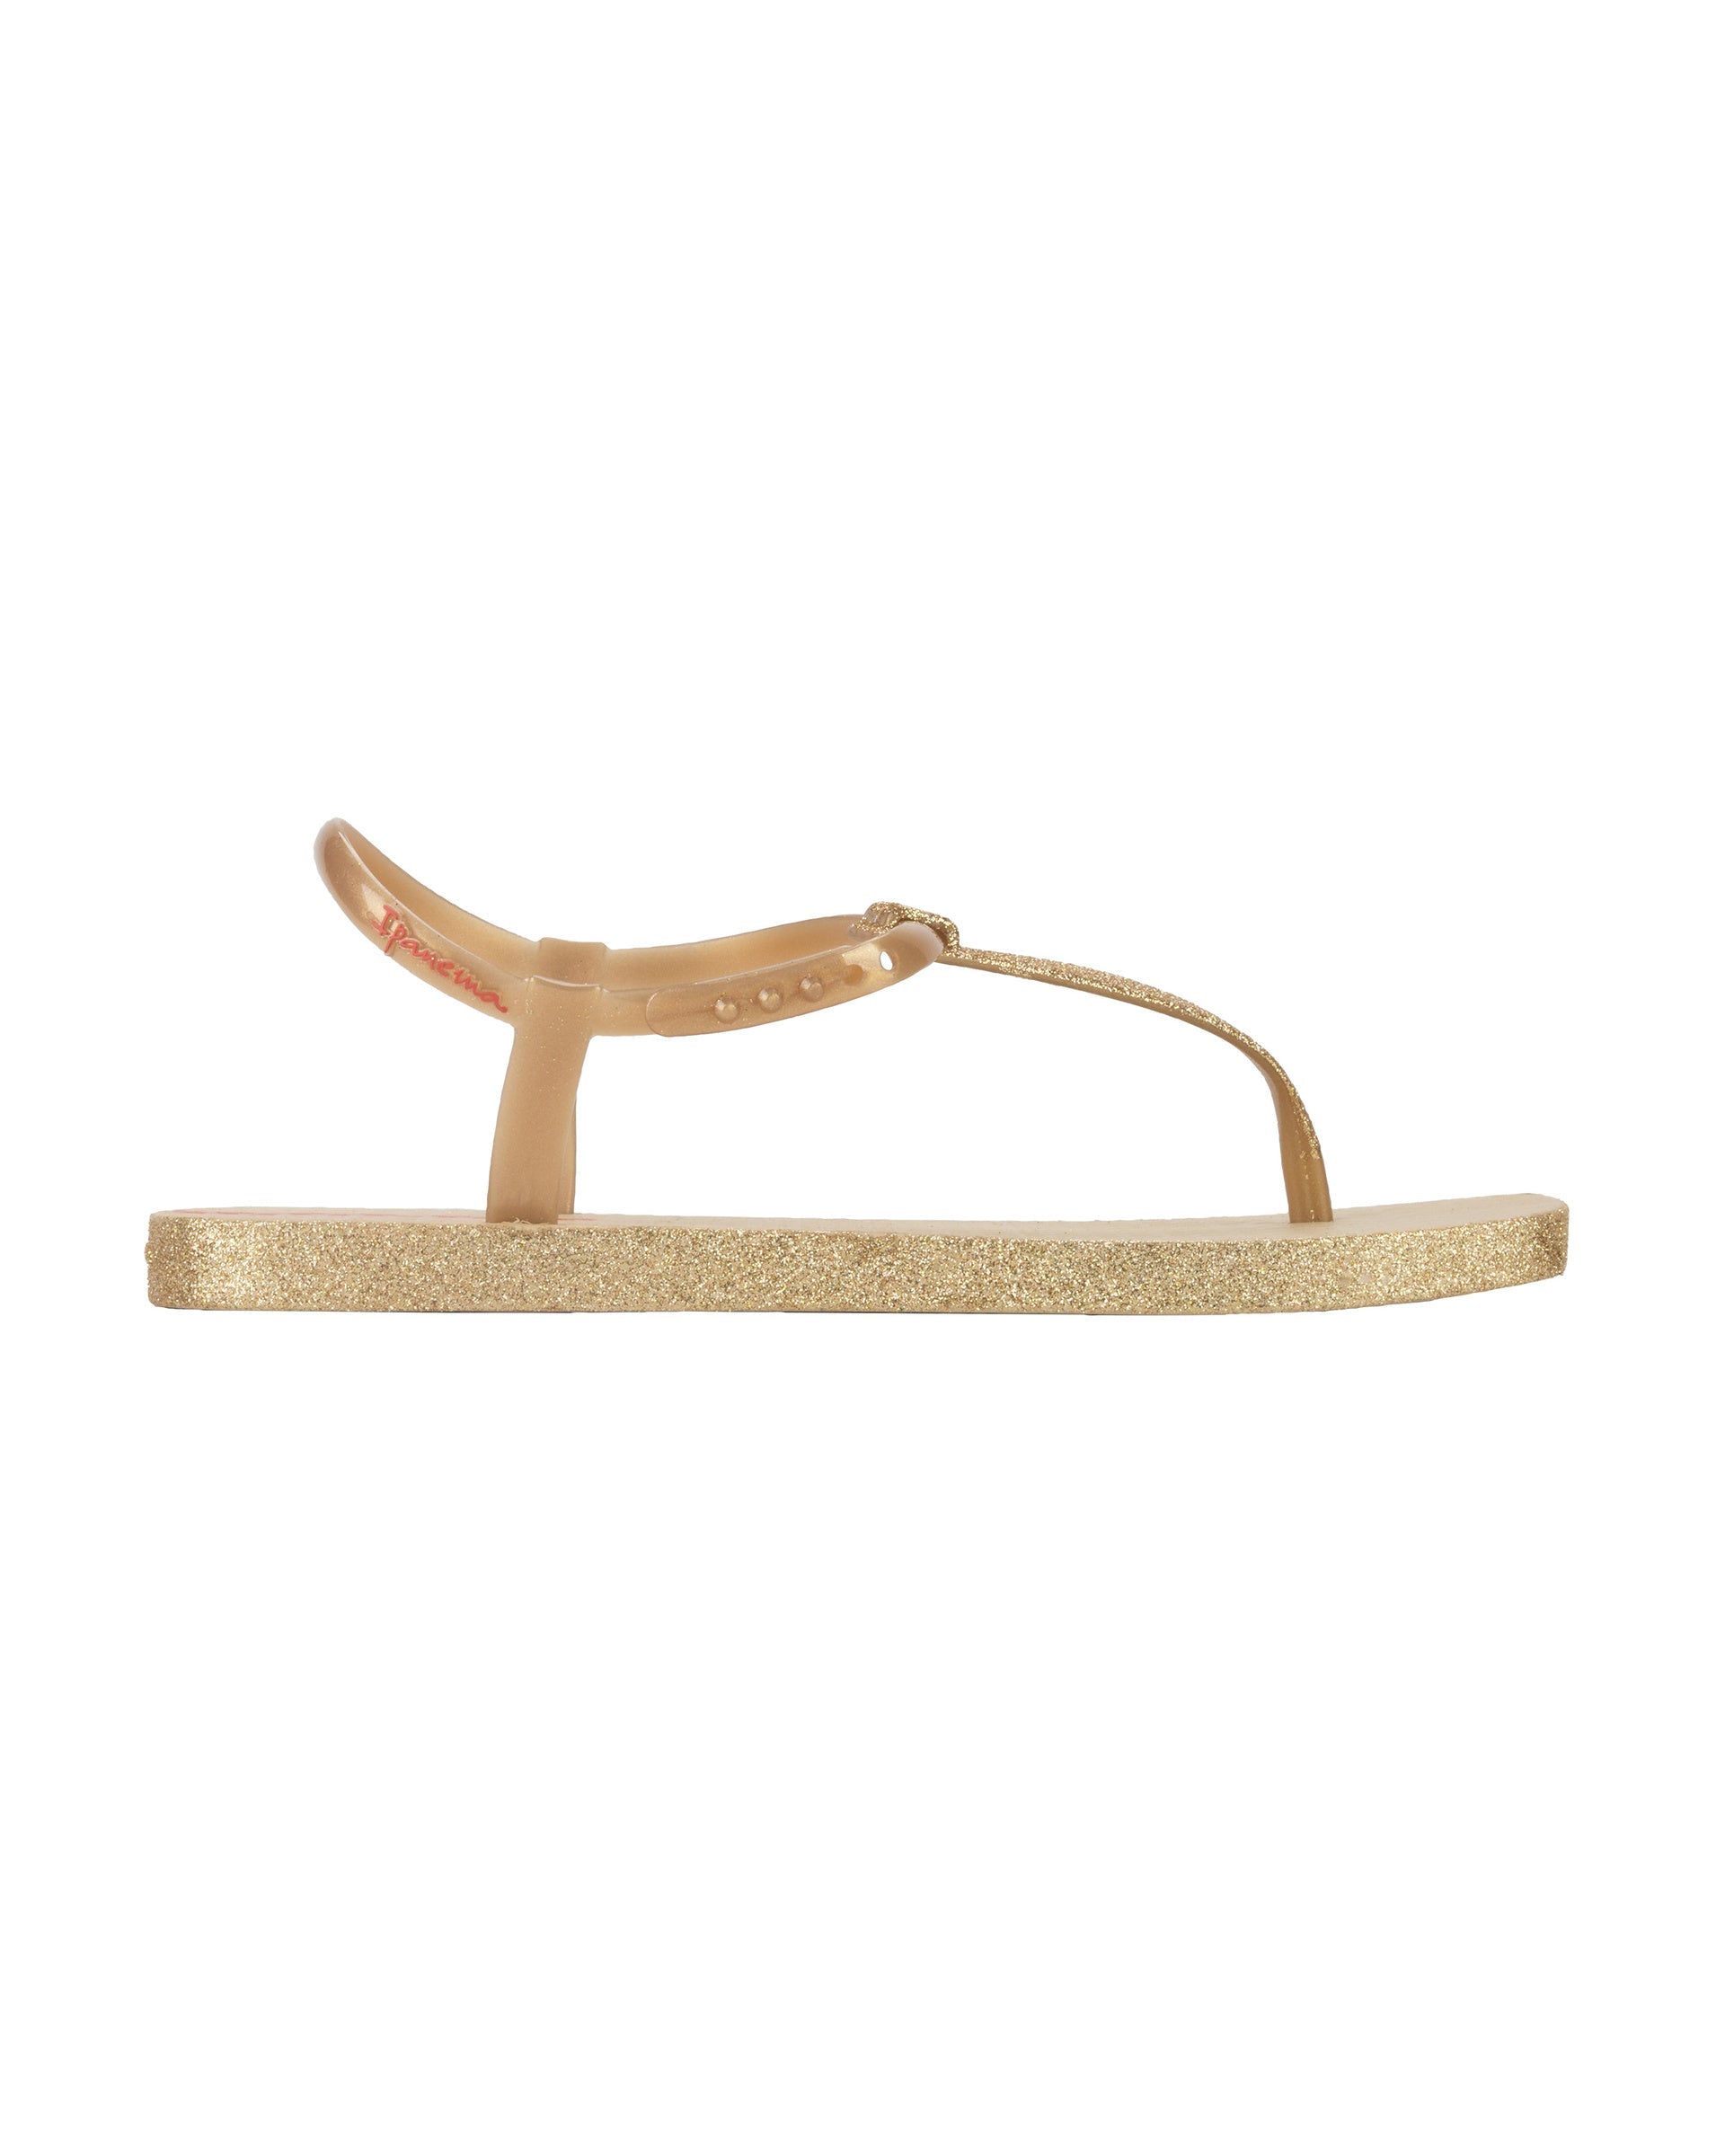 Outer side view of a beige Ipanema Class Edge Glow t-strap women's sandal with gold strap and glitter thong.